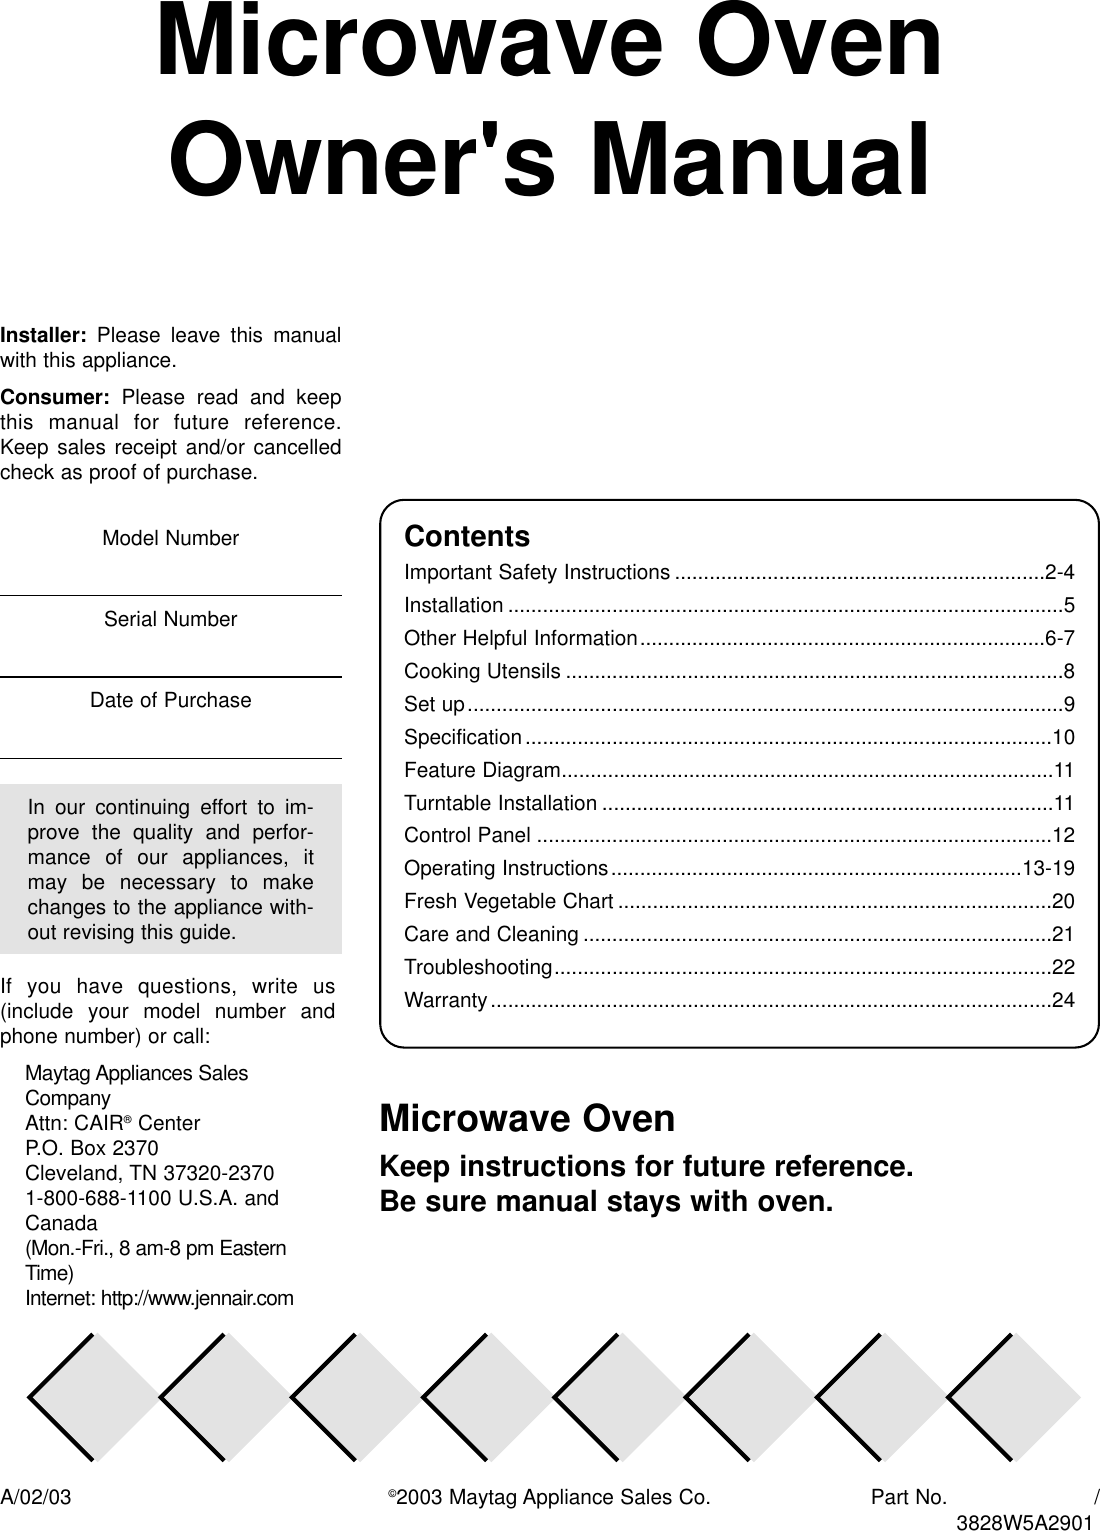 Microwave OvenOwner&apos;s ManualMicrowave OvenKeep instructions for future reference. Be sure manual stays with oven.ContentsImportant Safety Instructions ................................................................2-4Installation ................................................................................................5Other Helpful Information......................................................................6-7Cooking Utensils ......................................................................................8Set up.......................................................................................................9Specification...........................................................................................10Feature Diagram.....................................................................................11Turntable Installation ..............................................................................11Control Panel .........................................................................................12Operating Instructions.......................................................................13-19Fresh Vegetable Chart ...........................................................................20Care and Cleaning .................................................................................21Troubleshooting......................................................................................22Warranty.................................................................................................24A/02/03 ©2003 Maytag Appliance Sales Co. Part No.                       /Installer: Please  leave  this  manualwith this appliance.Consumer: Please  read  and  keepthis  manual  for  future  reference.Keep sales receipt  and/or  cancelledcheck as proof of purchase.If  you  have  questions,  write  us(include  your  model  number  andphone number) or call:Maytag Appliances SalesCompanyAttn: CAIR®CenterP.O. Box 2370Cleveland, TN 37320-23701-800-688-1100 U.S.A. andCanada(Mon.-Fri., 8 am-8 pm EasternTime)Internet: http://www.jennair.comIn  our  continuing  effort  to  im-prove  the  quality  and  perfor-mance  of  our  appliances,  itmay  be  necessary  to  makechanges to the appliance with-out revising this guide.Model NumberSerial NumberDate of Purchase3828W5A2901